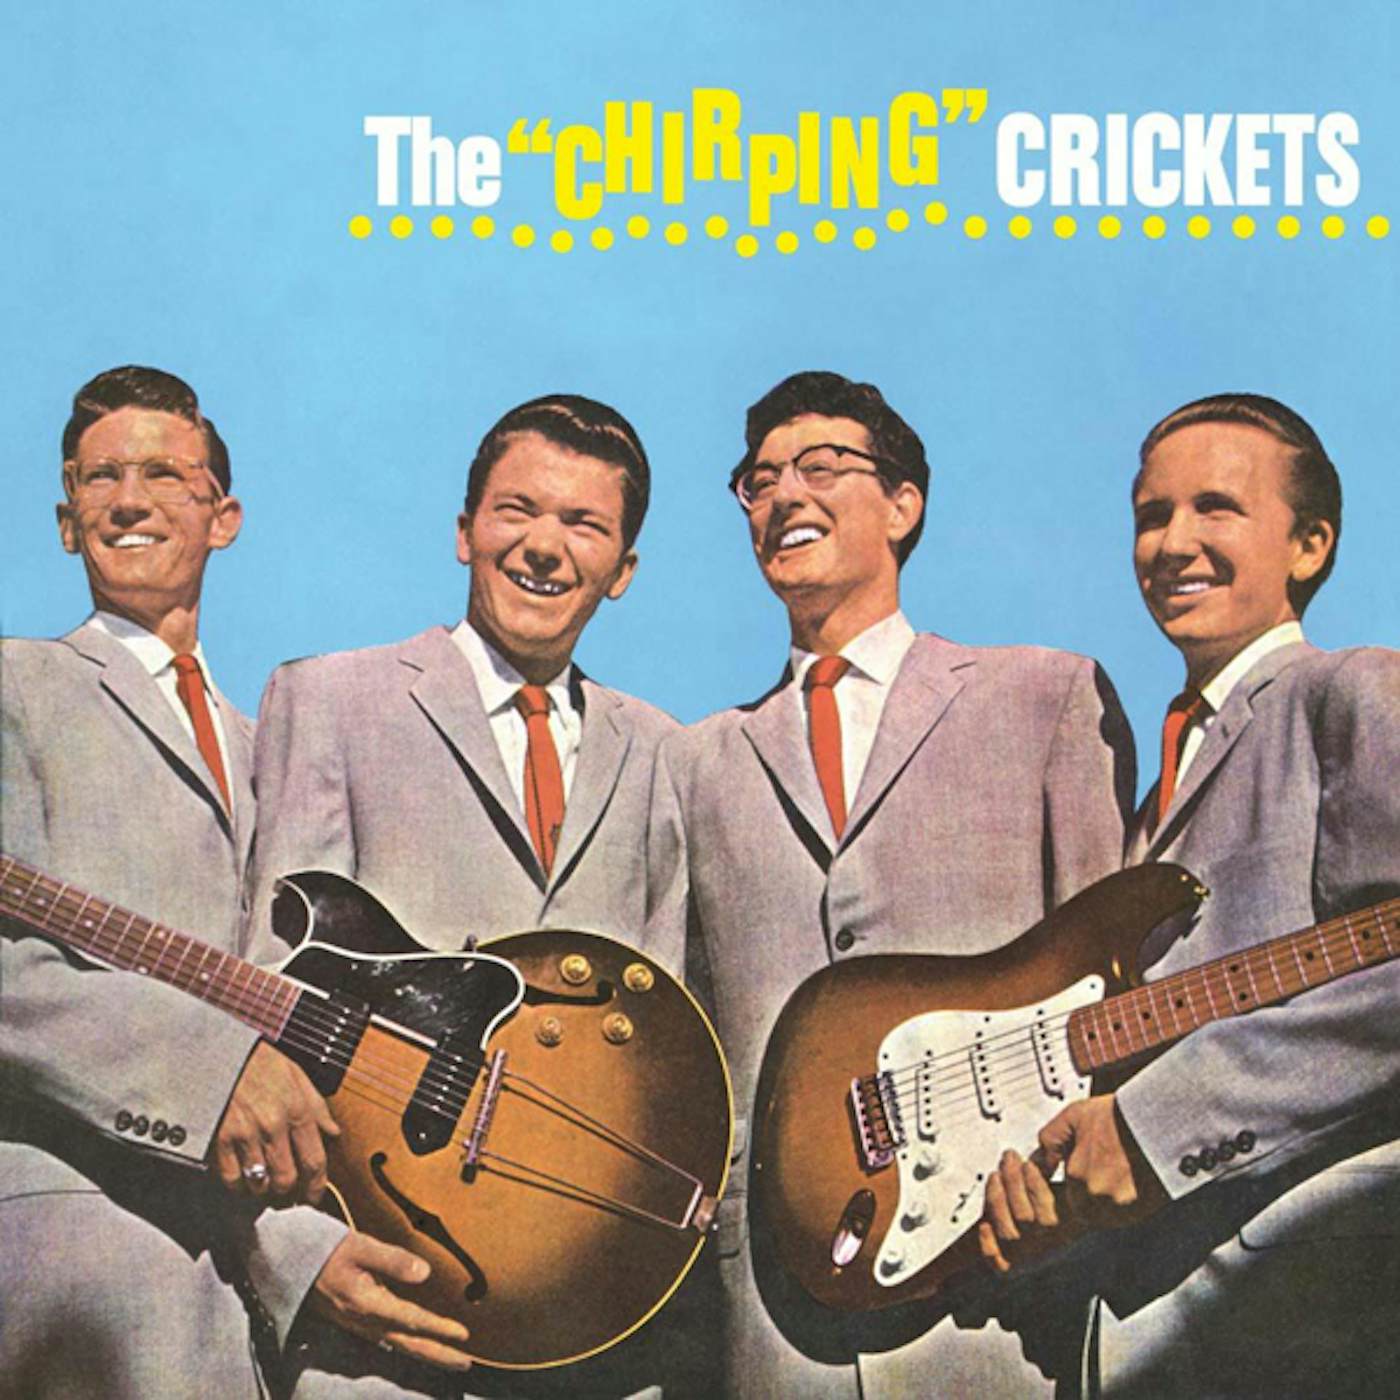 Buddy Holly & The Crickets CHIRPING CRICKETS Vinyl Record